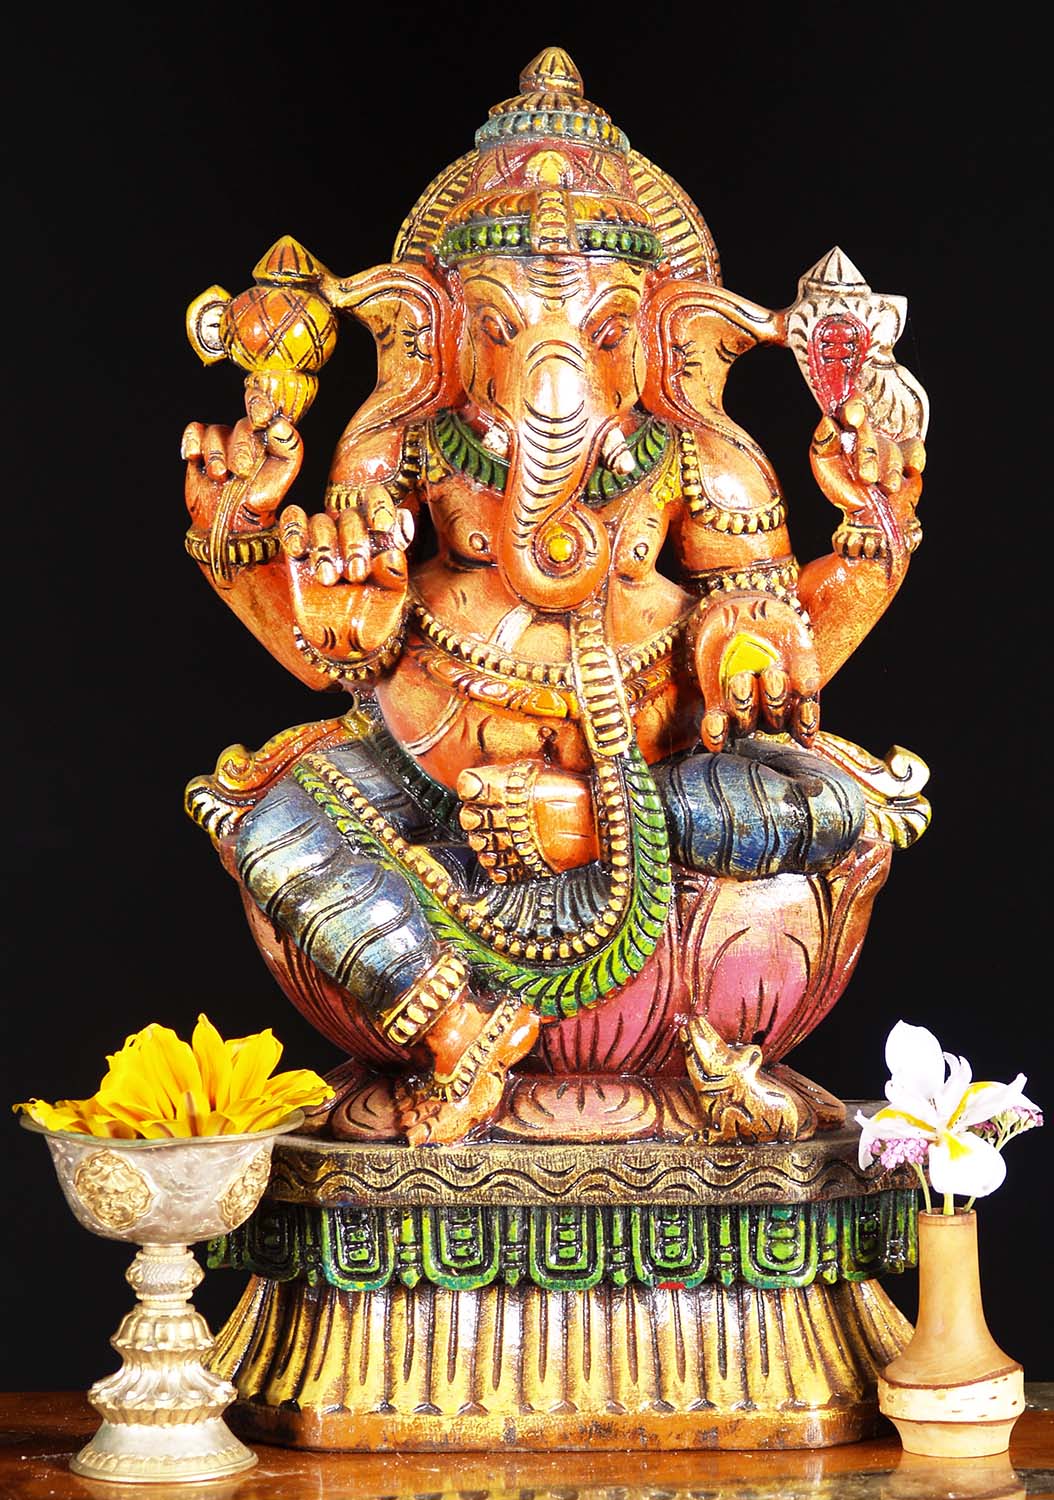 Sold Wooden Seated Ganesh Statue 18 76w6cy Hindu Gods And Buddha Statues 5465